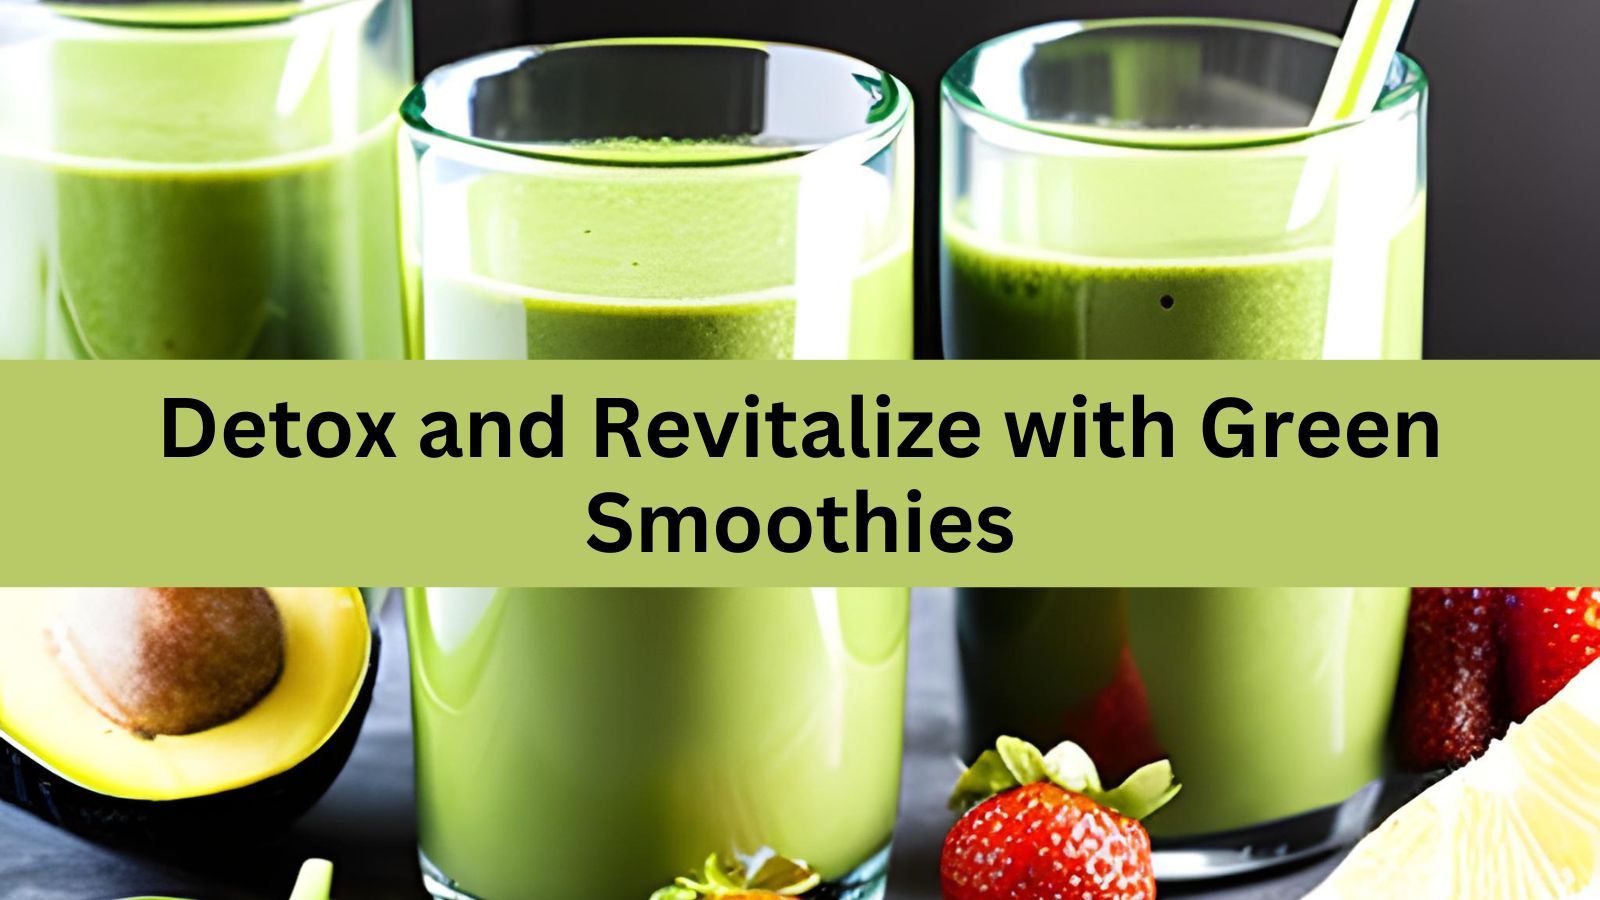 Detox and Revitalize with Green Smoothies